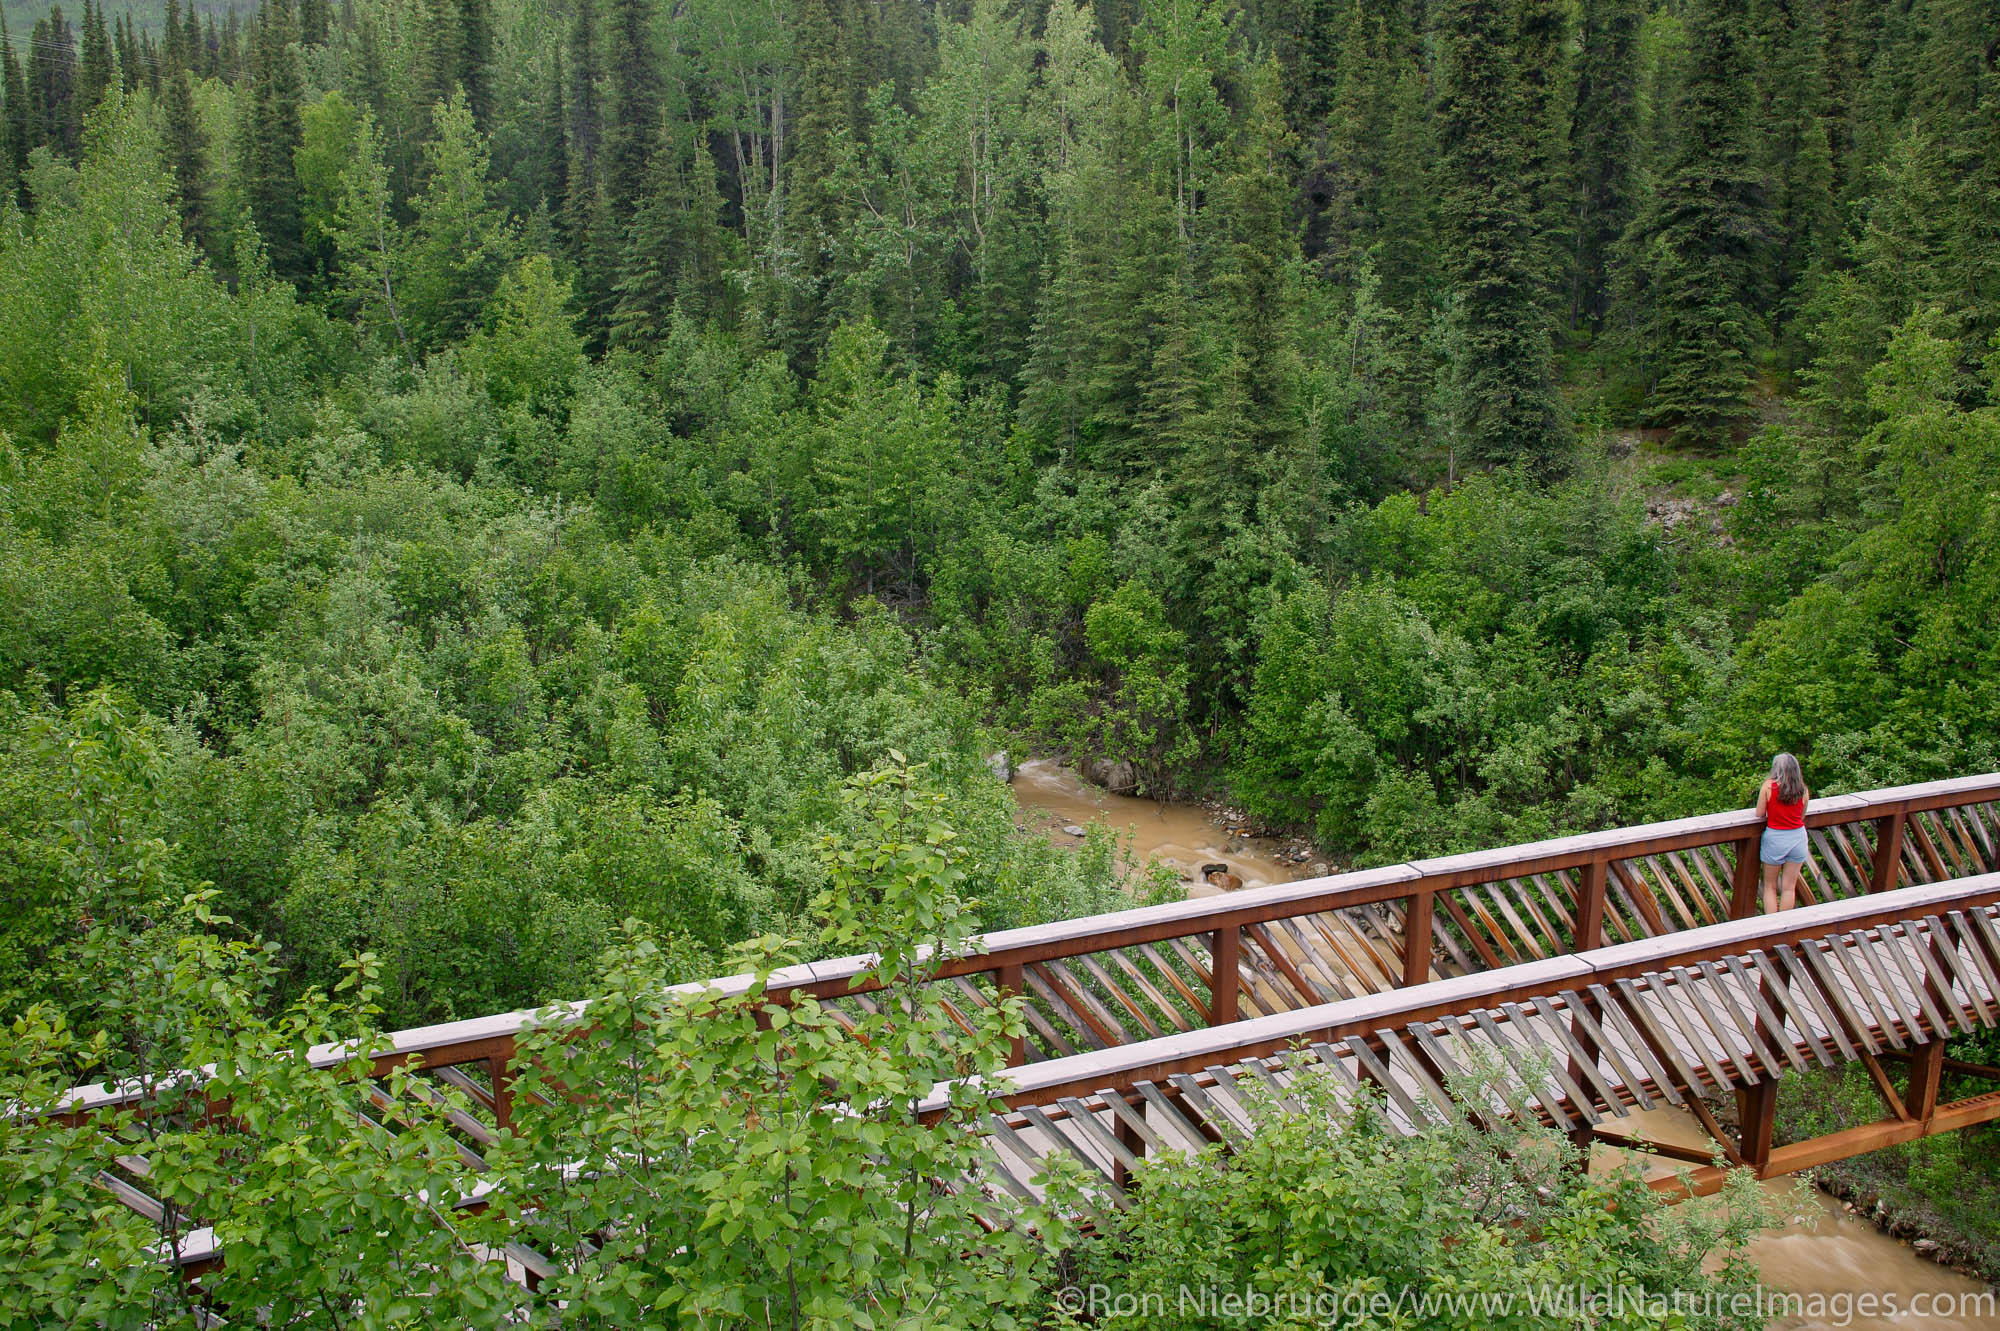 A visitor on the foot bridge over Rock Creek as part of the roadside trails near the entrance of Denali National Park, Alaska...